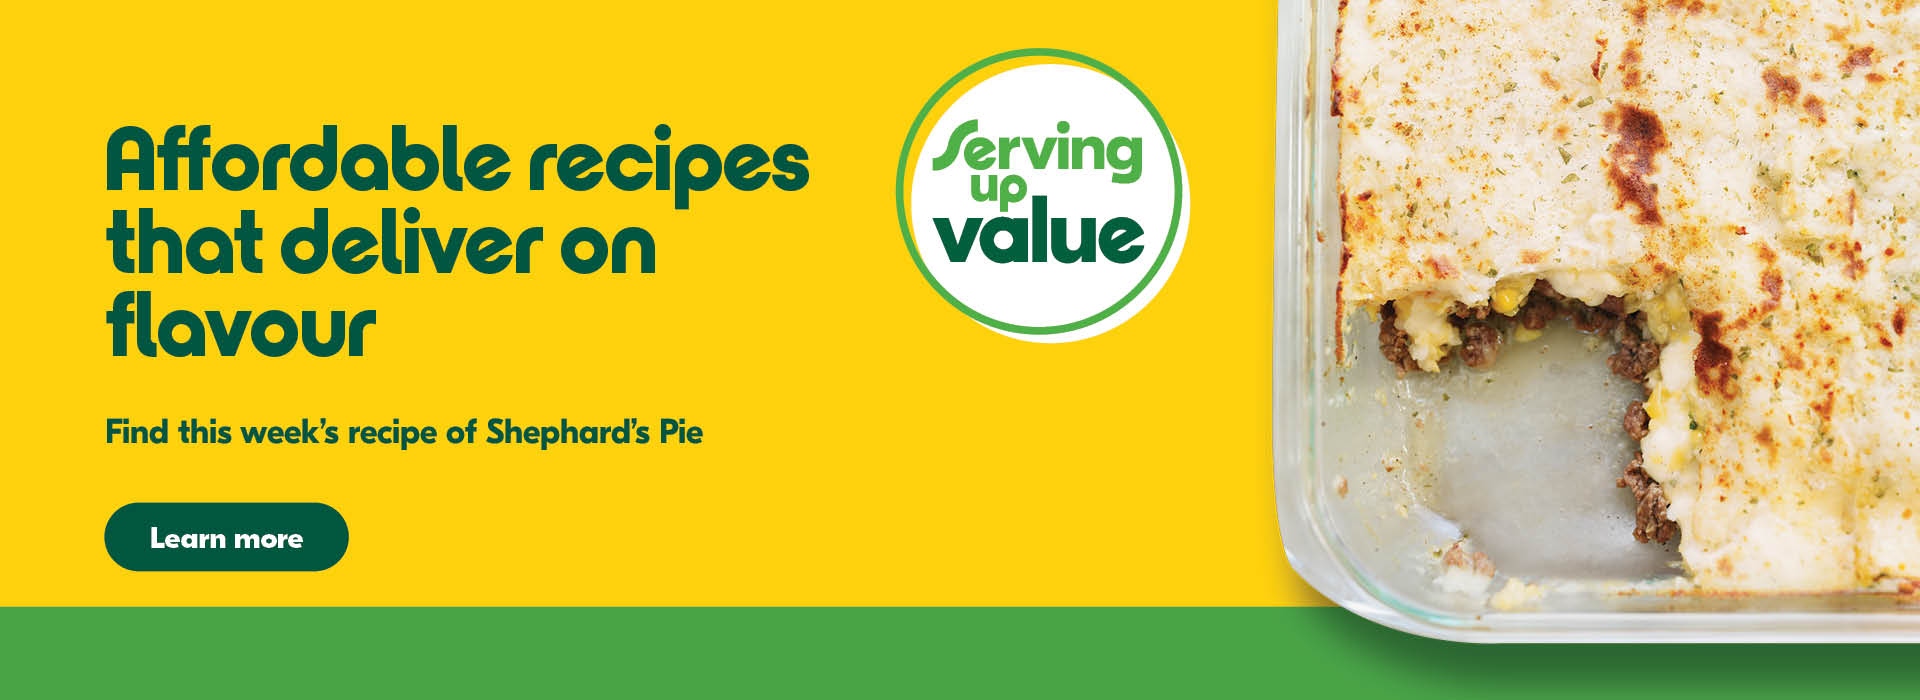 Affordable recipes that deliver on flavour; this weeks recipe is Shephard's Pie